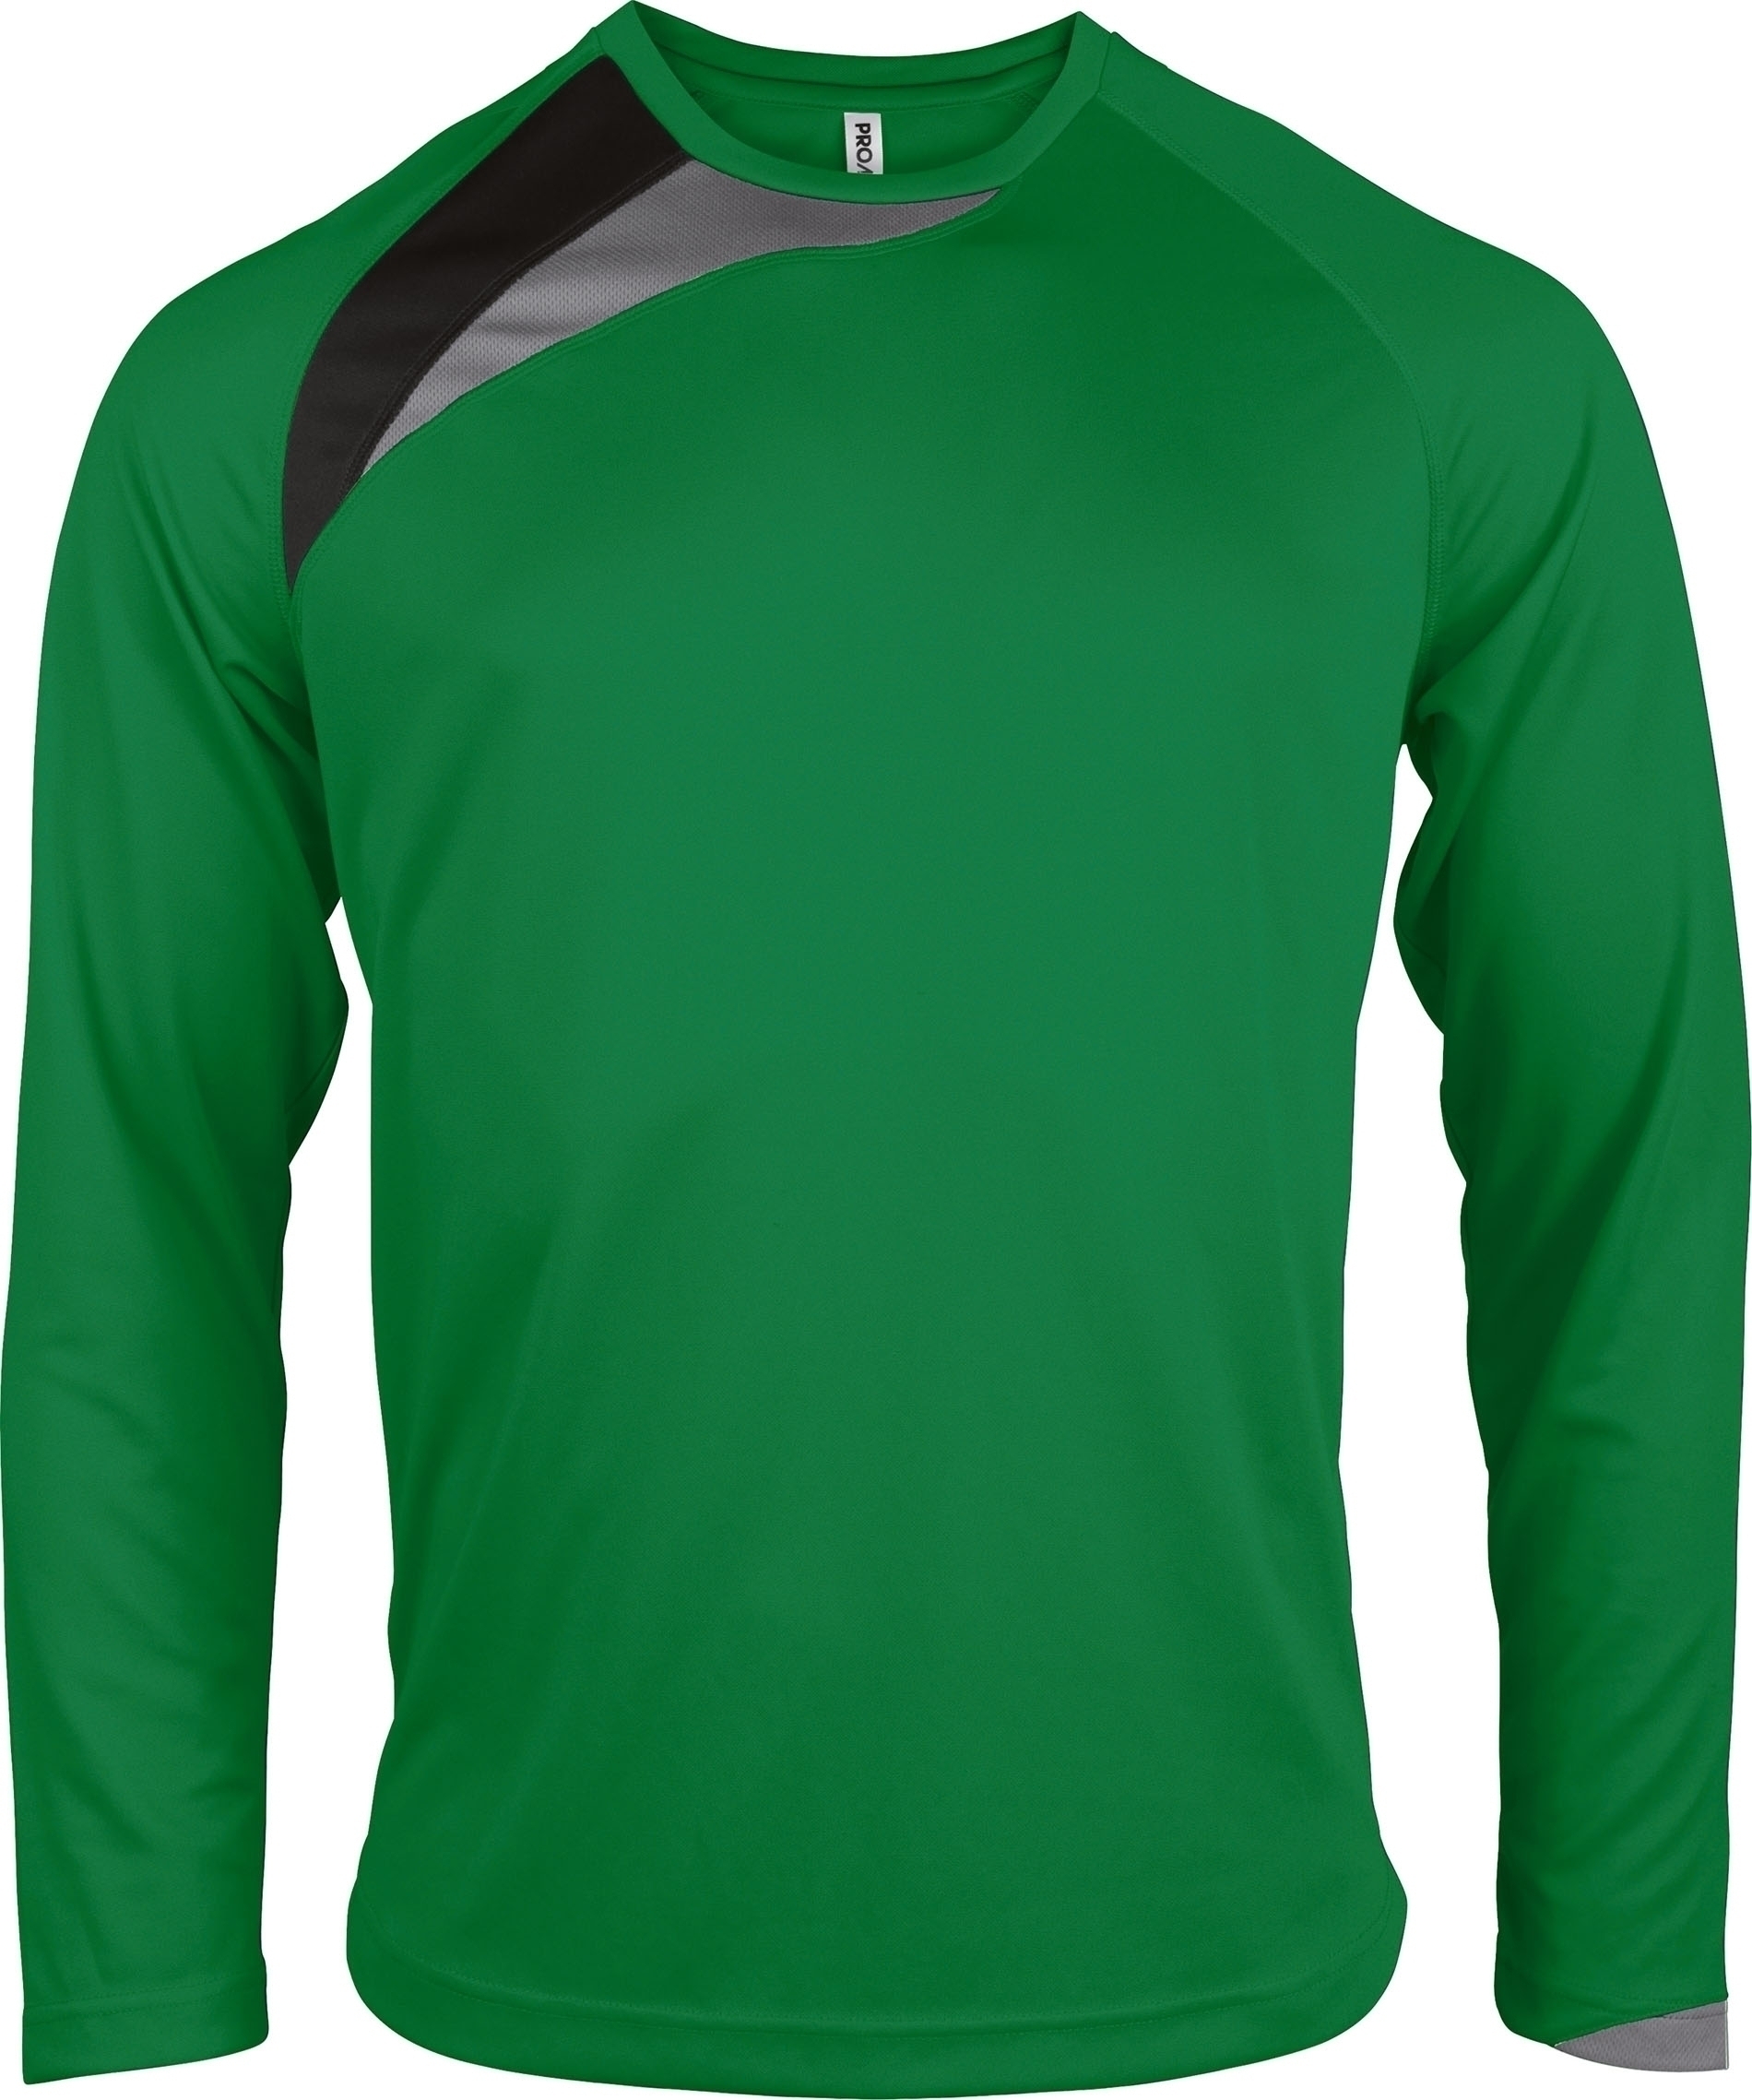 MAILLOT MANCHES LONGUES ADULTE Green / Black / Storm Grey Vert